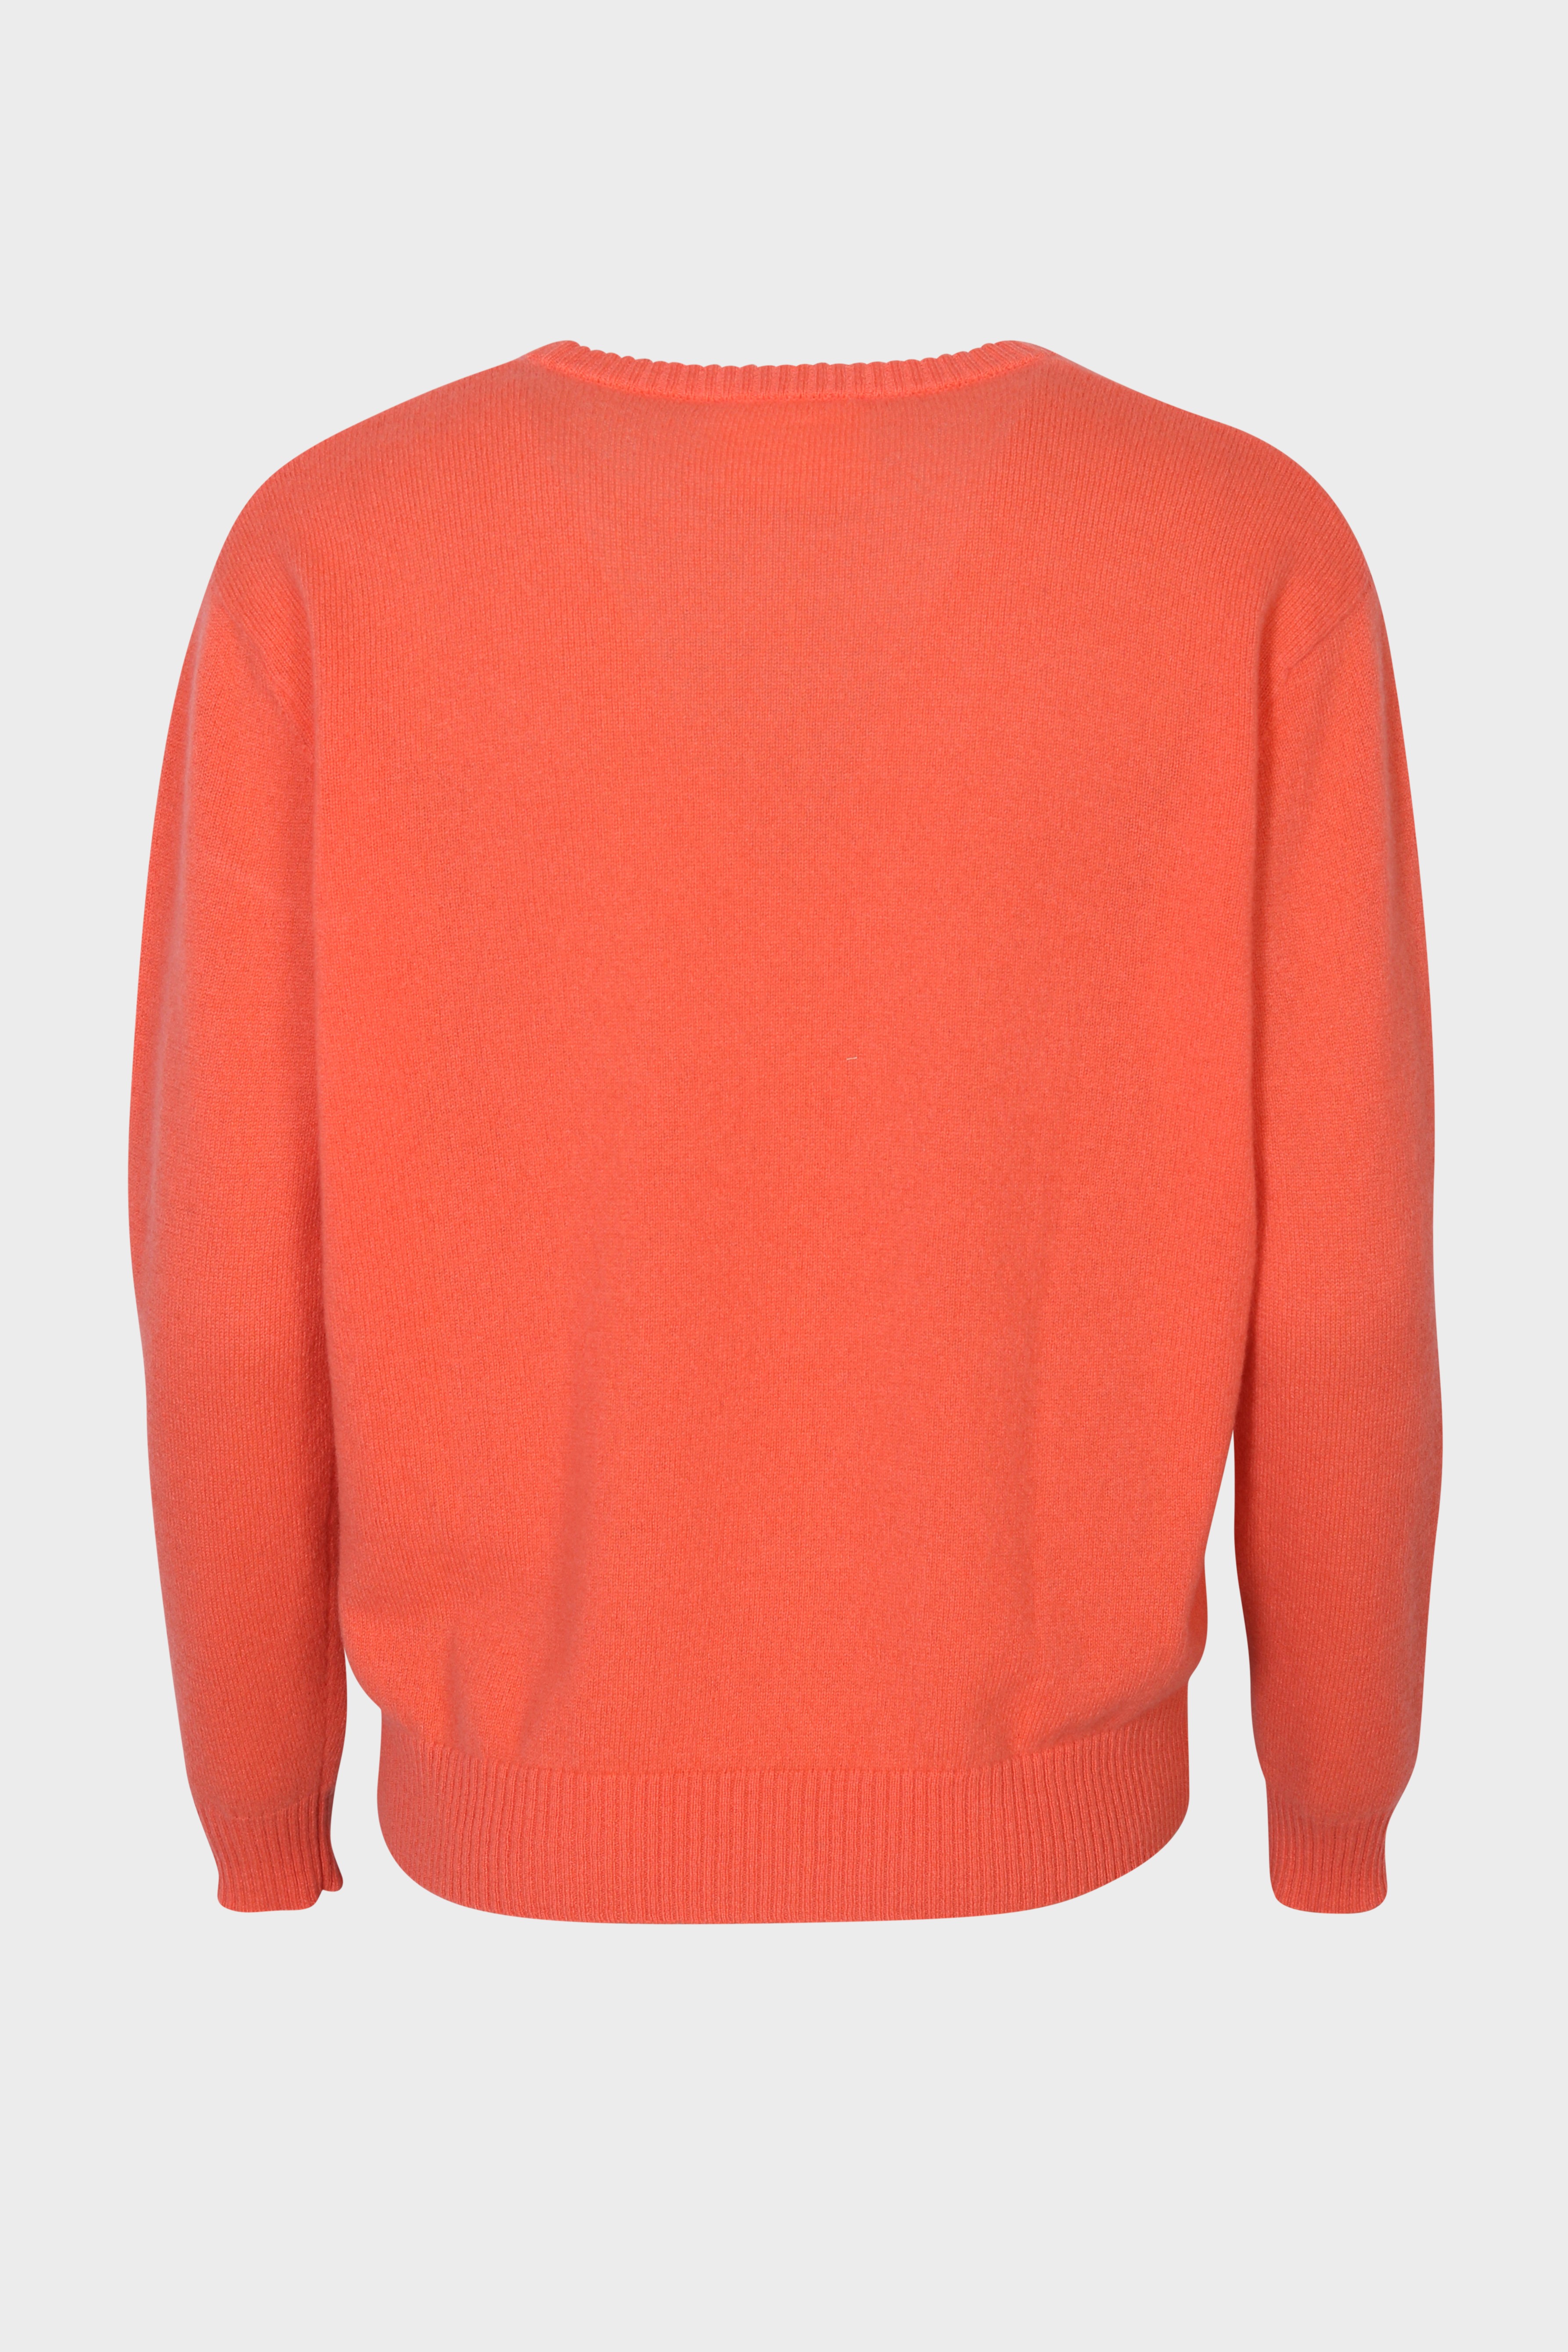 ABSOLUT CASHMERE Sweater Ysee Melon S